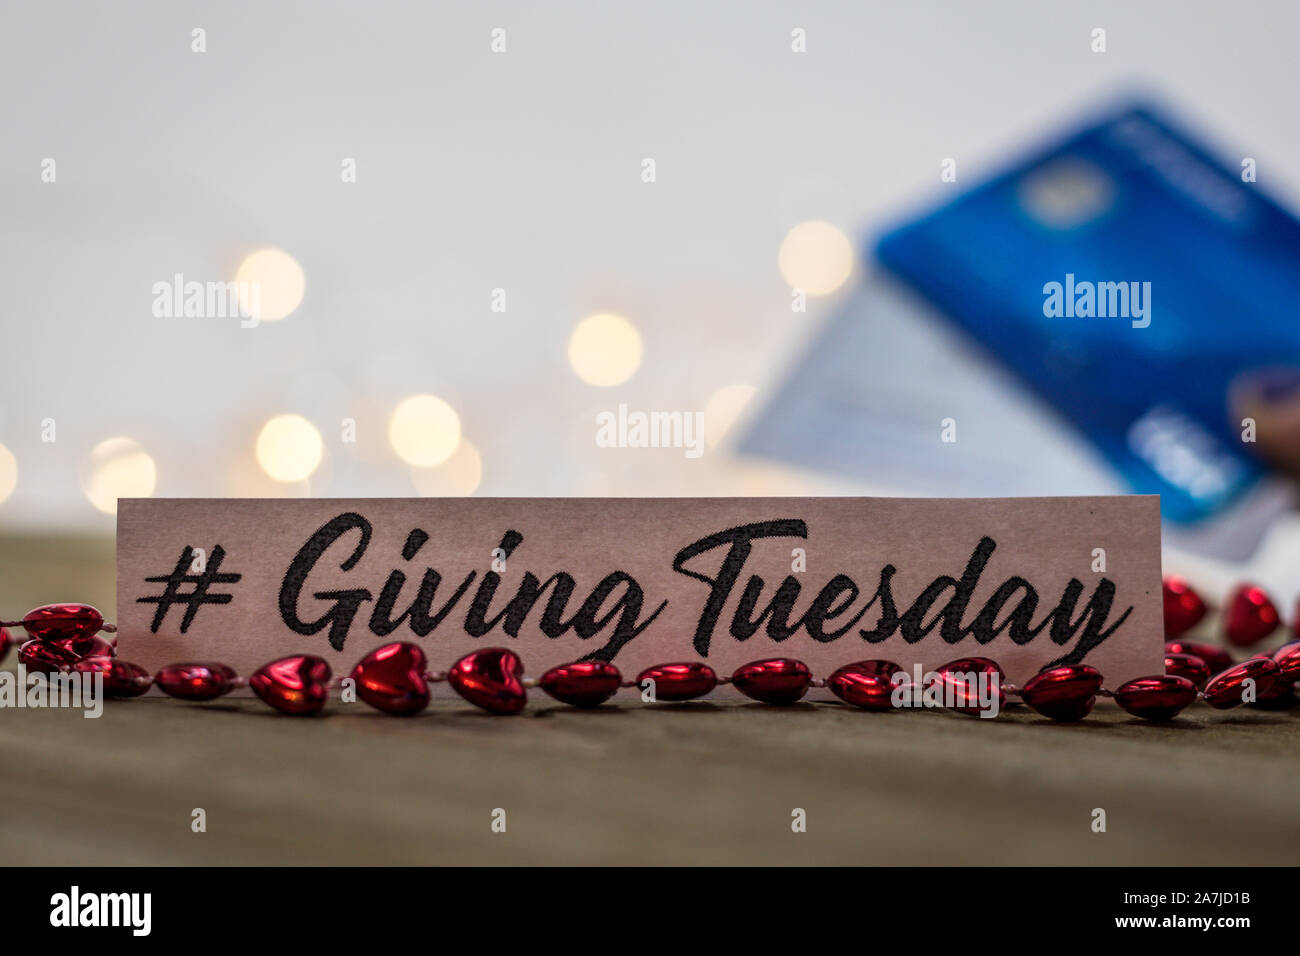 Giving Tuesday donate charity concept with text and cash credit cards on wooden board Stock Photo